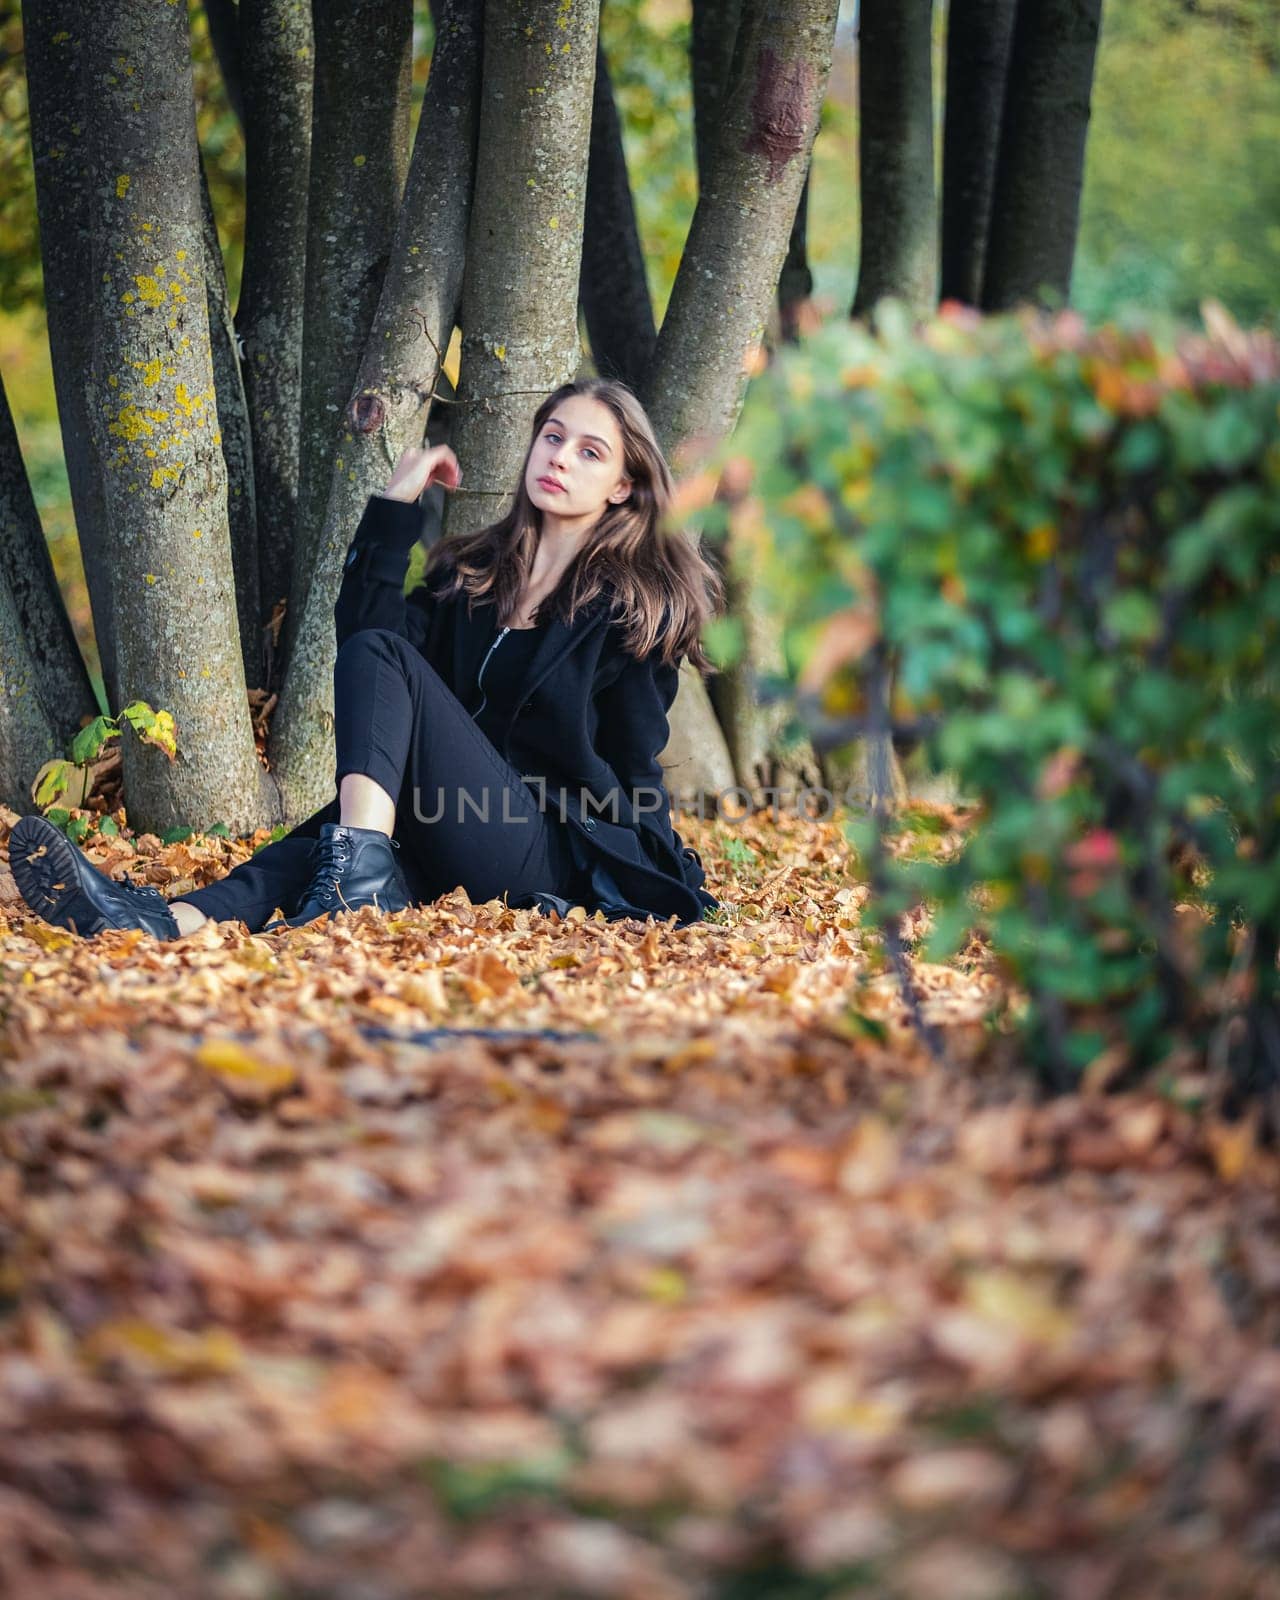 A beautiful girl sits by a tree on fallen leaves in an autumn park. by Yurich32